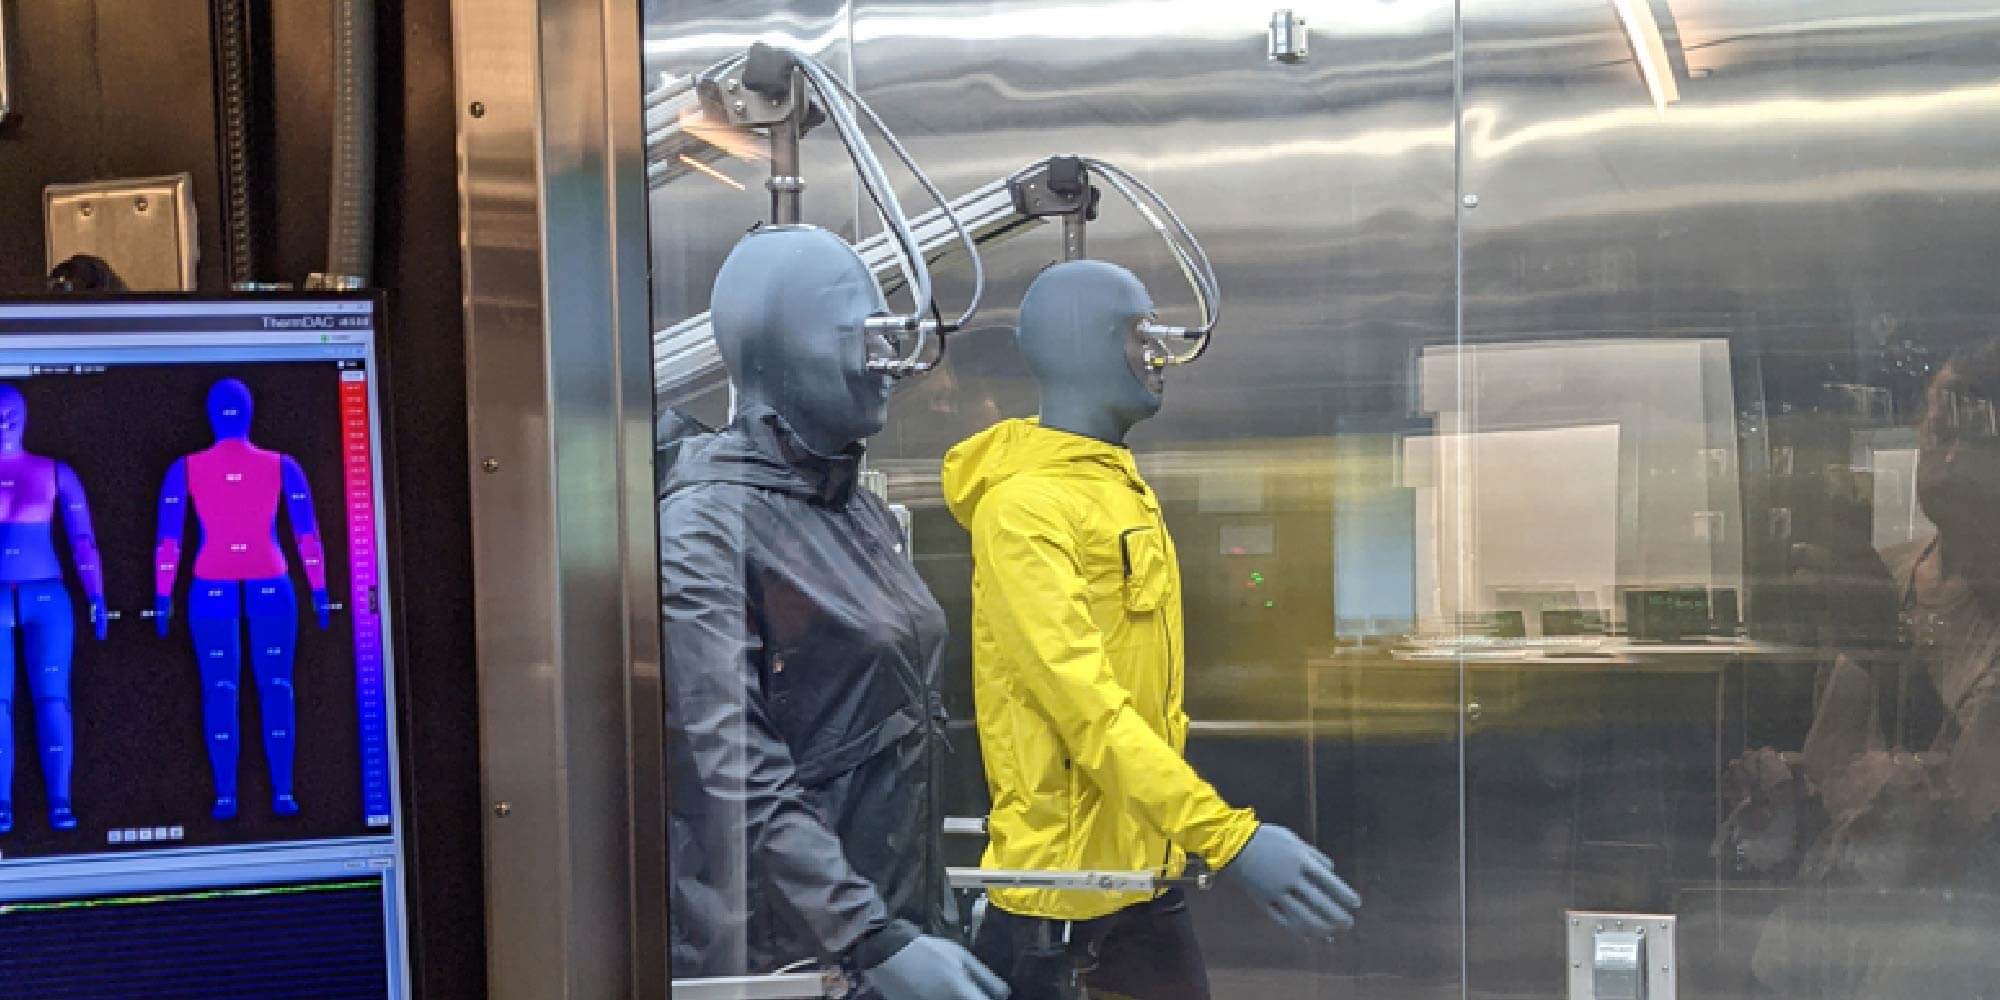 Liz Female Thermal Manikin Puts in the Reps at Nike’s Innovation Center